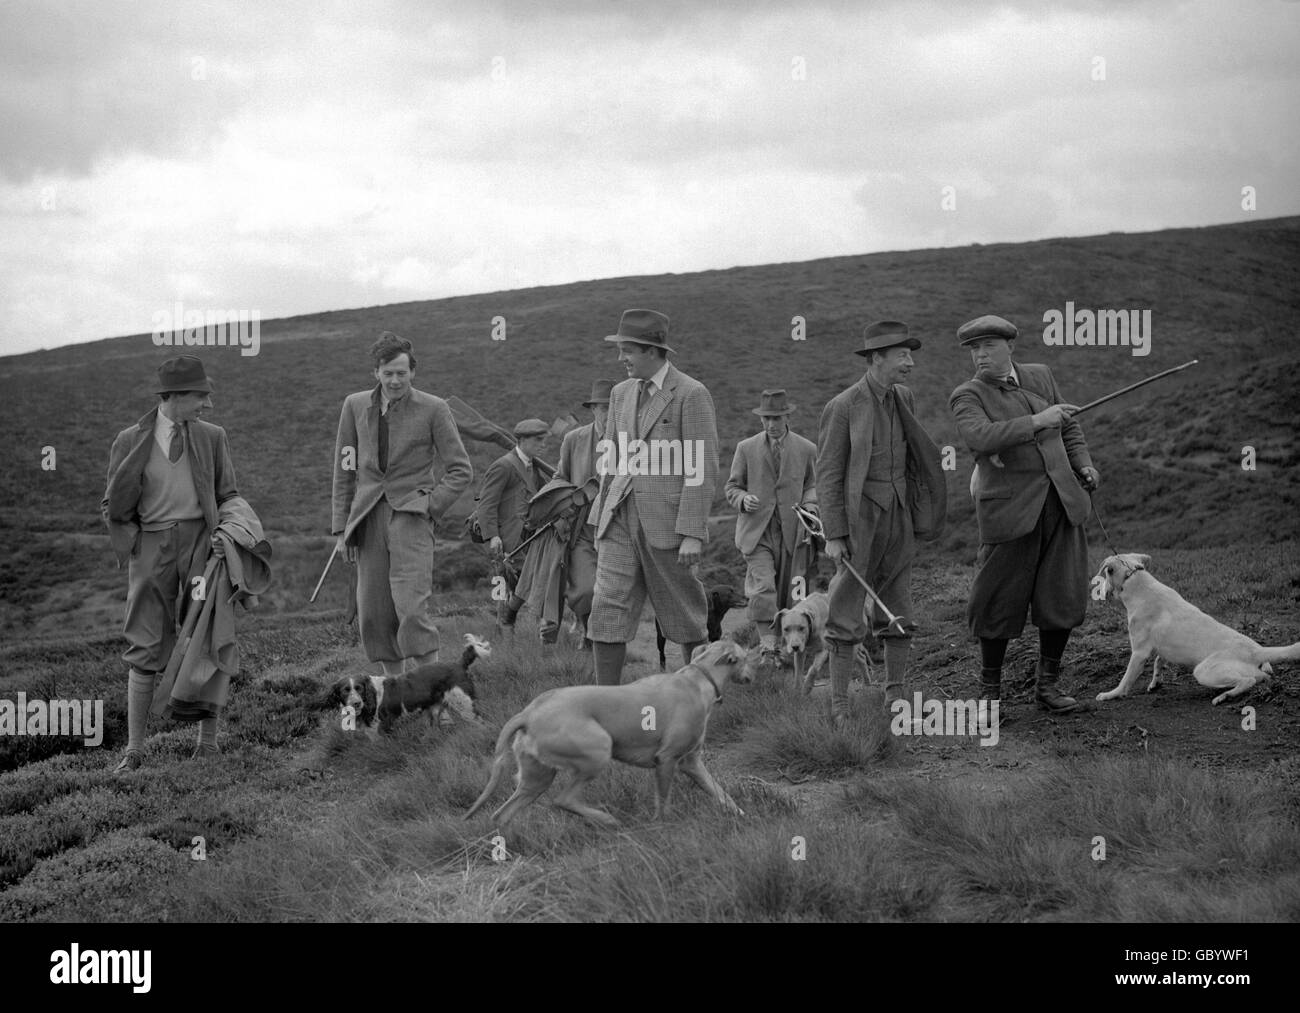 Left to right, The Hon. Major David Ormsby Gore, Lord Hartington, the Hon. Robert Cecil and the Duke of Devonshire, speaking to Mr Stitt, the Head Keeper, on the day the Duke of Devonshire opened grouse shooting season over the Bolton Abbey Moors, Yorkshire. Stock Photo